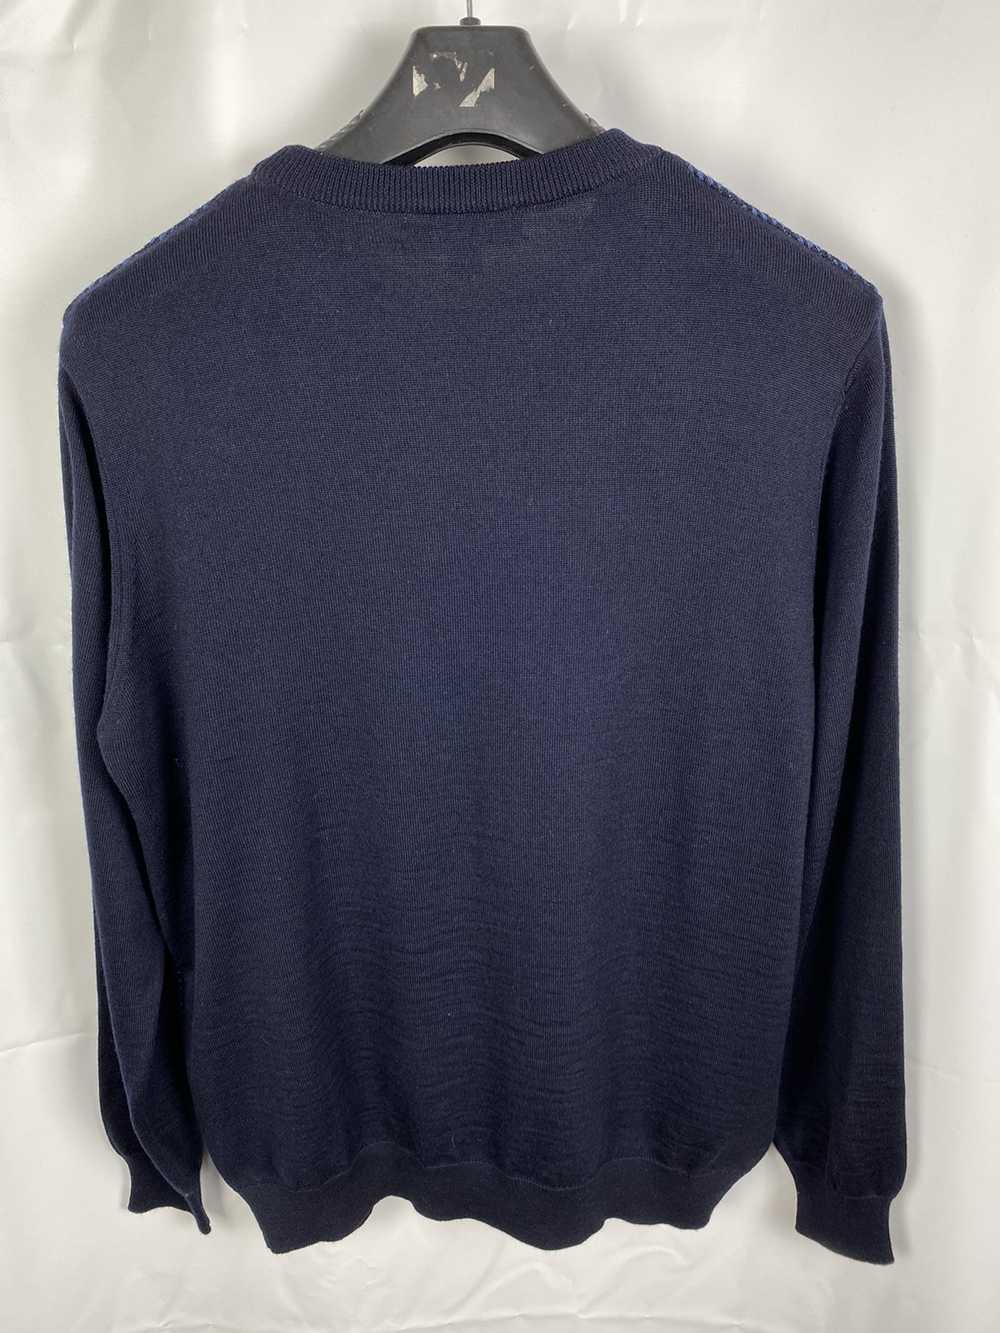 Burberry Burberry London Wool Knit Blue Sweater s… - image 5